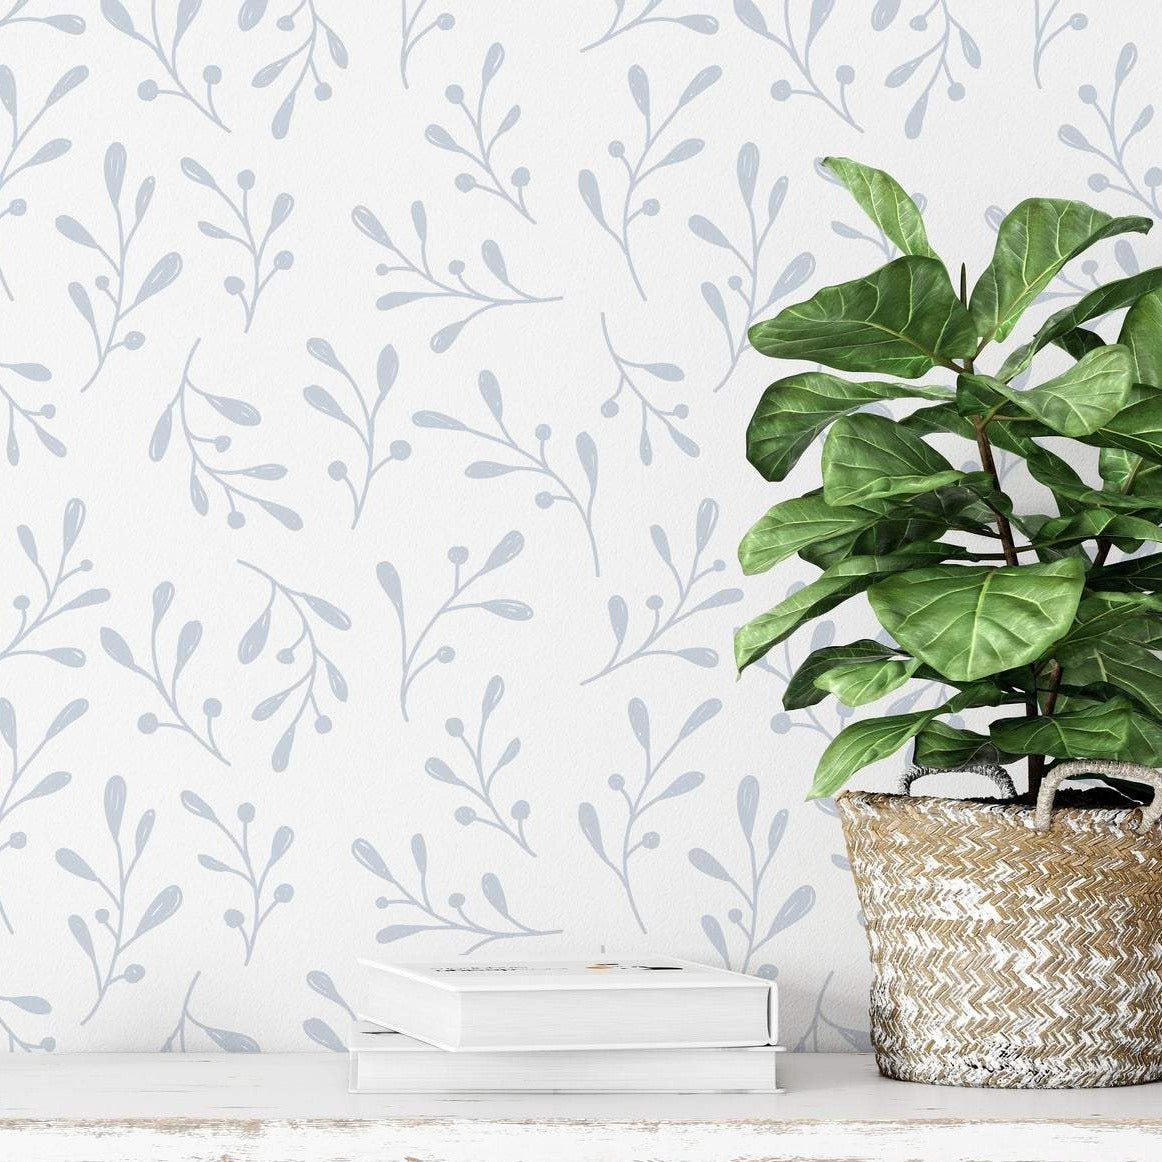 A lifestyle scene with the Natural Wallpaper II adorning a wall behind a lush green potted plant sitting atop a white book on a wooden floor. The botanical grey sprigs on the wallpaper bring a naturalistic and tranquil vibe to the space.